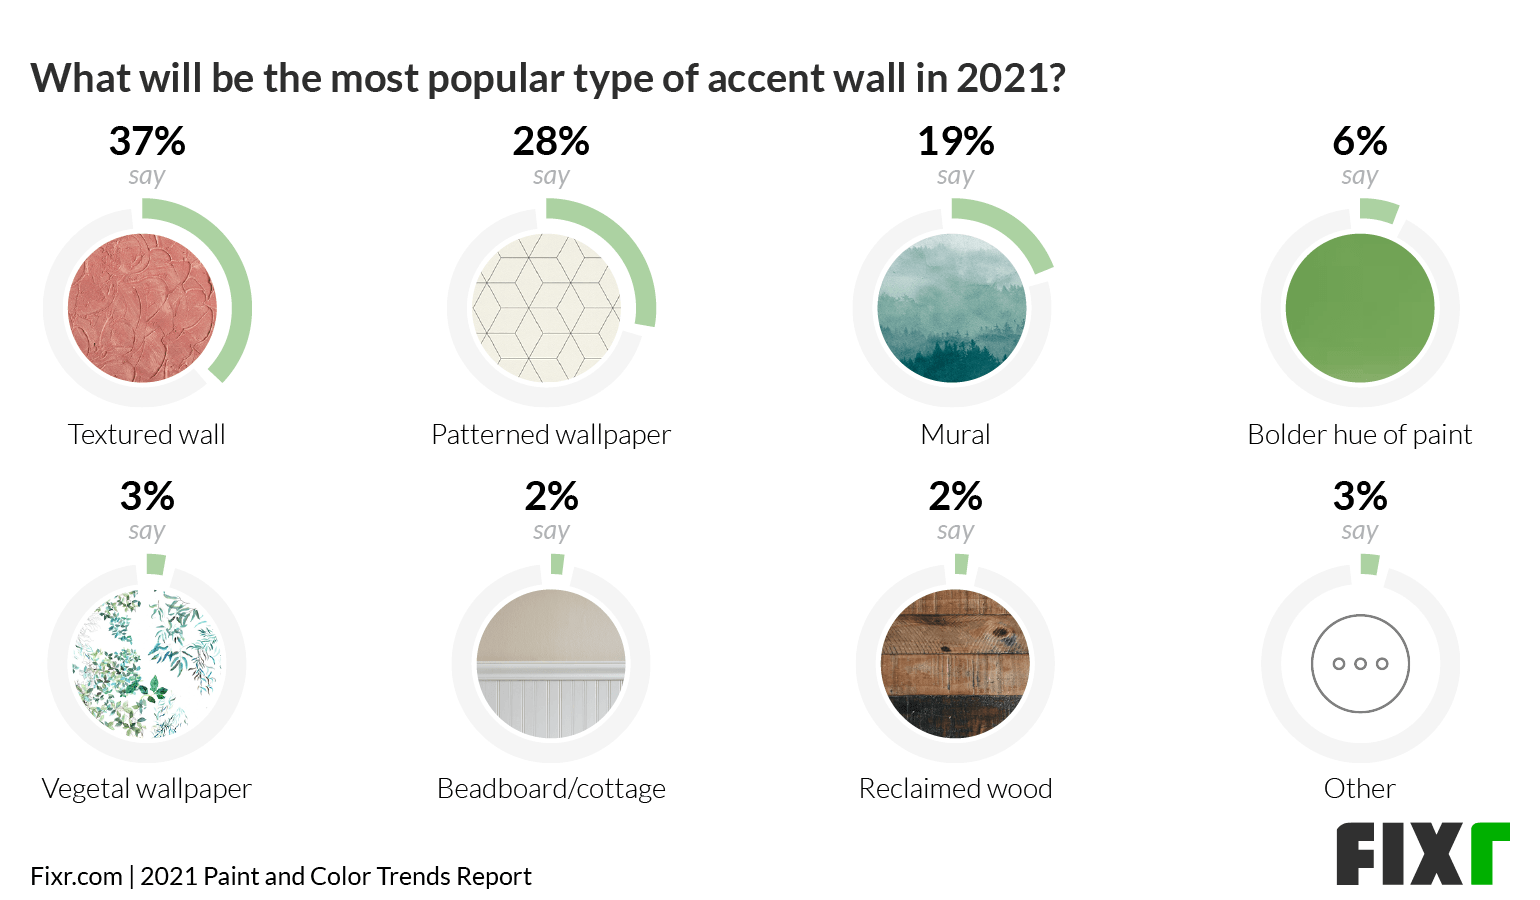 Paint & Color Trends 2021 - Top Accent Walls in 2021